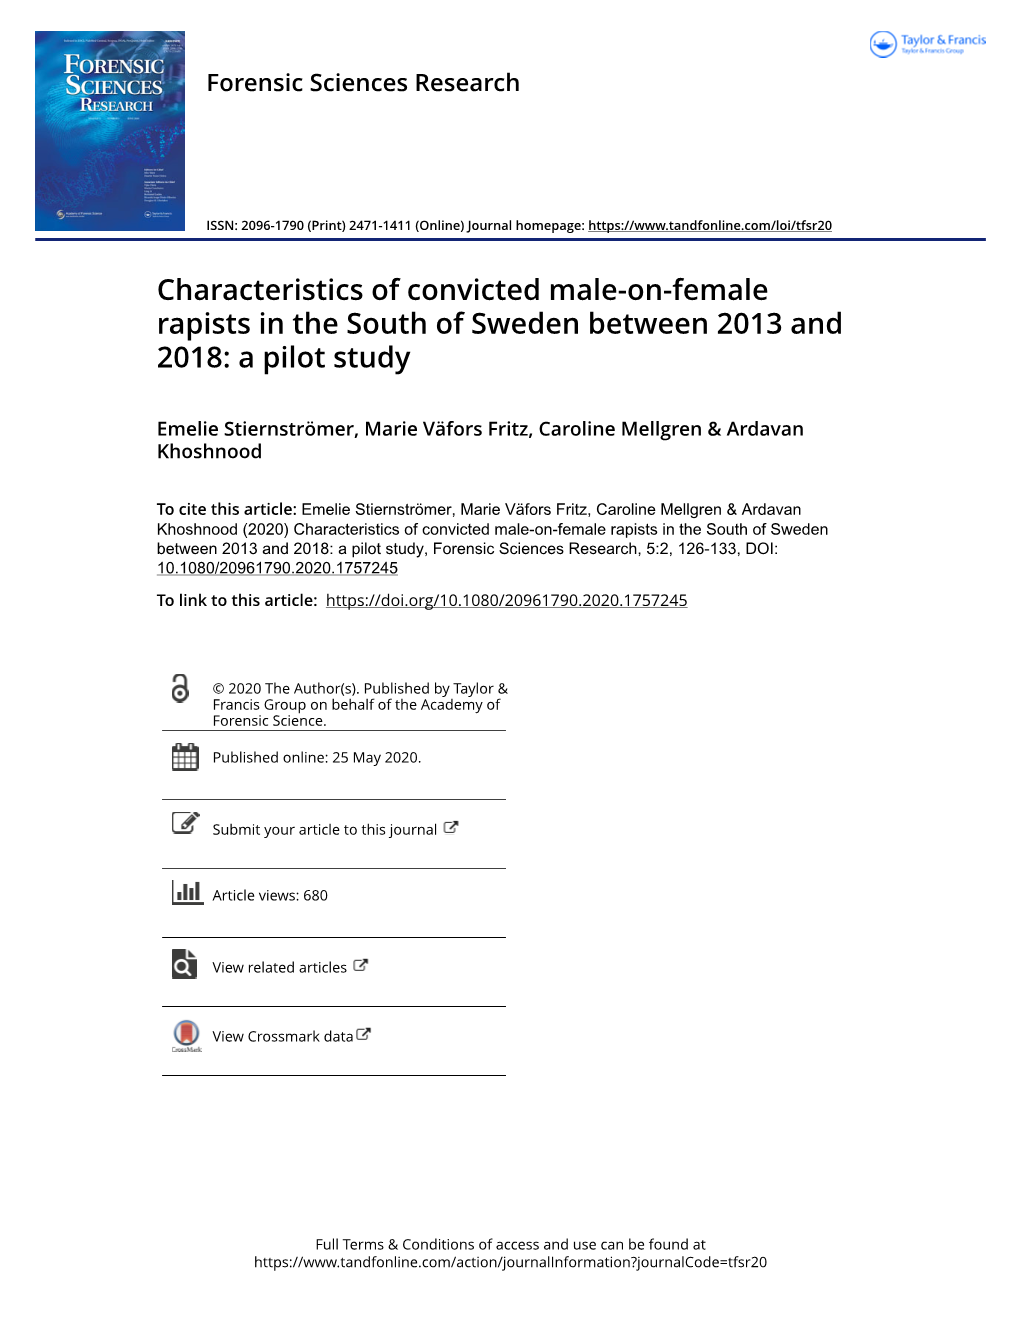 Characteristics of Convicted Male-On-Female Rapists in the South of Sweden Between 2013 and 2018: a Pilot Study